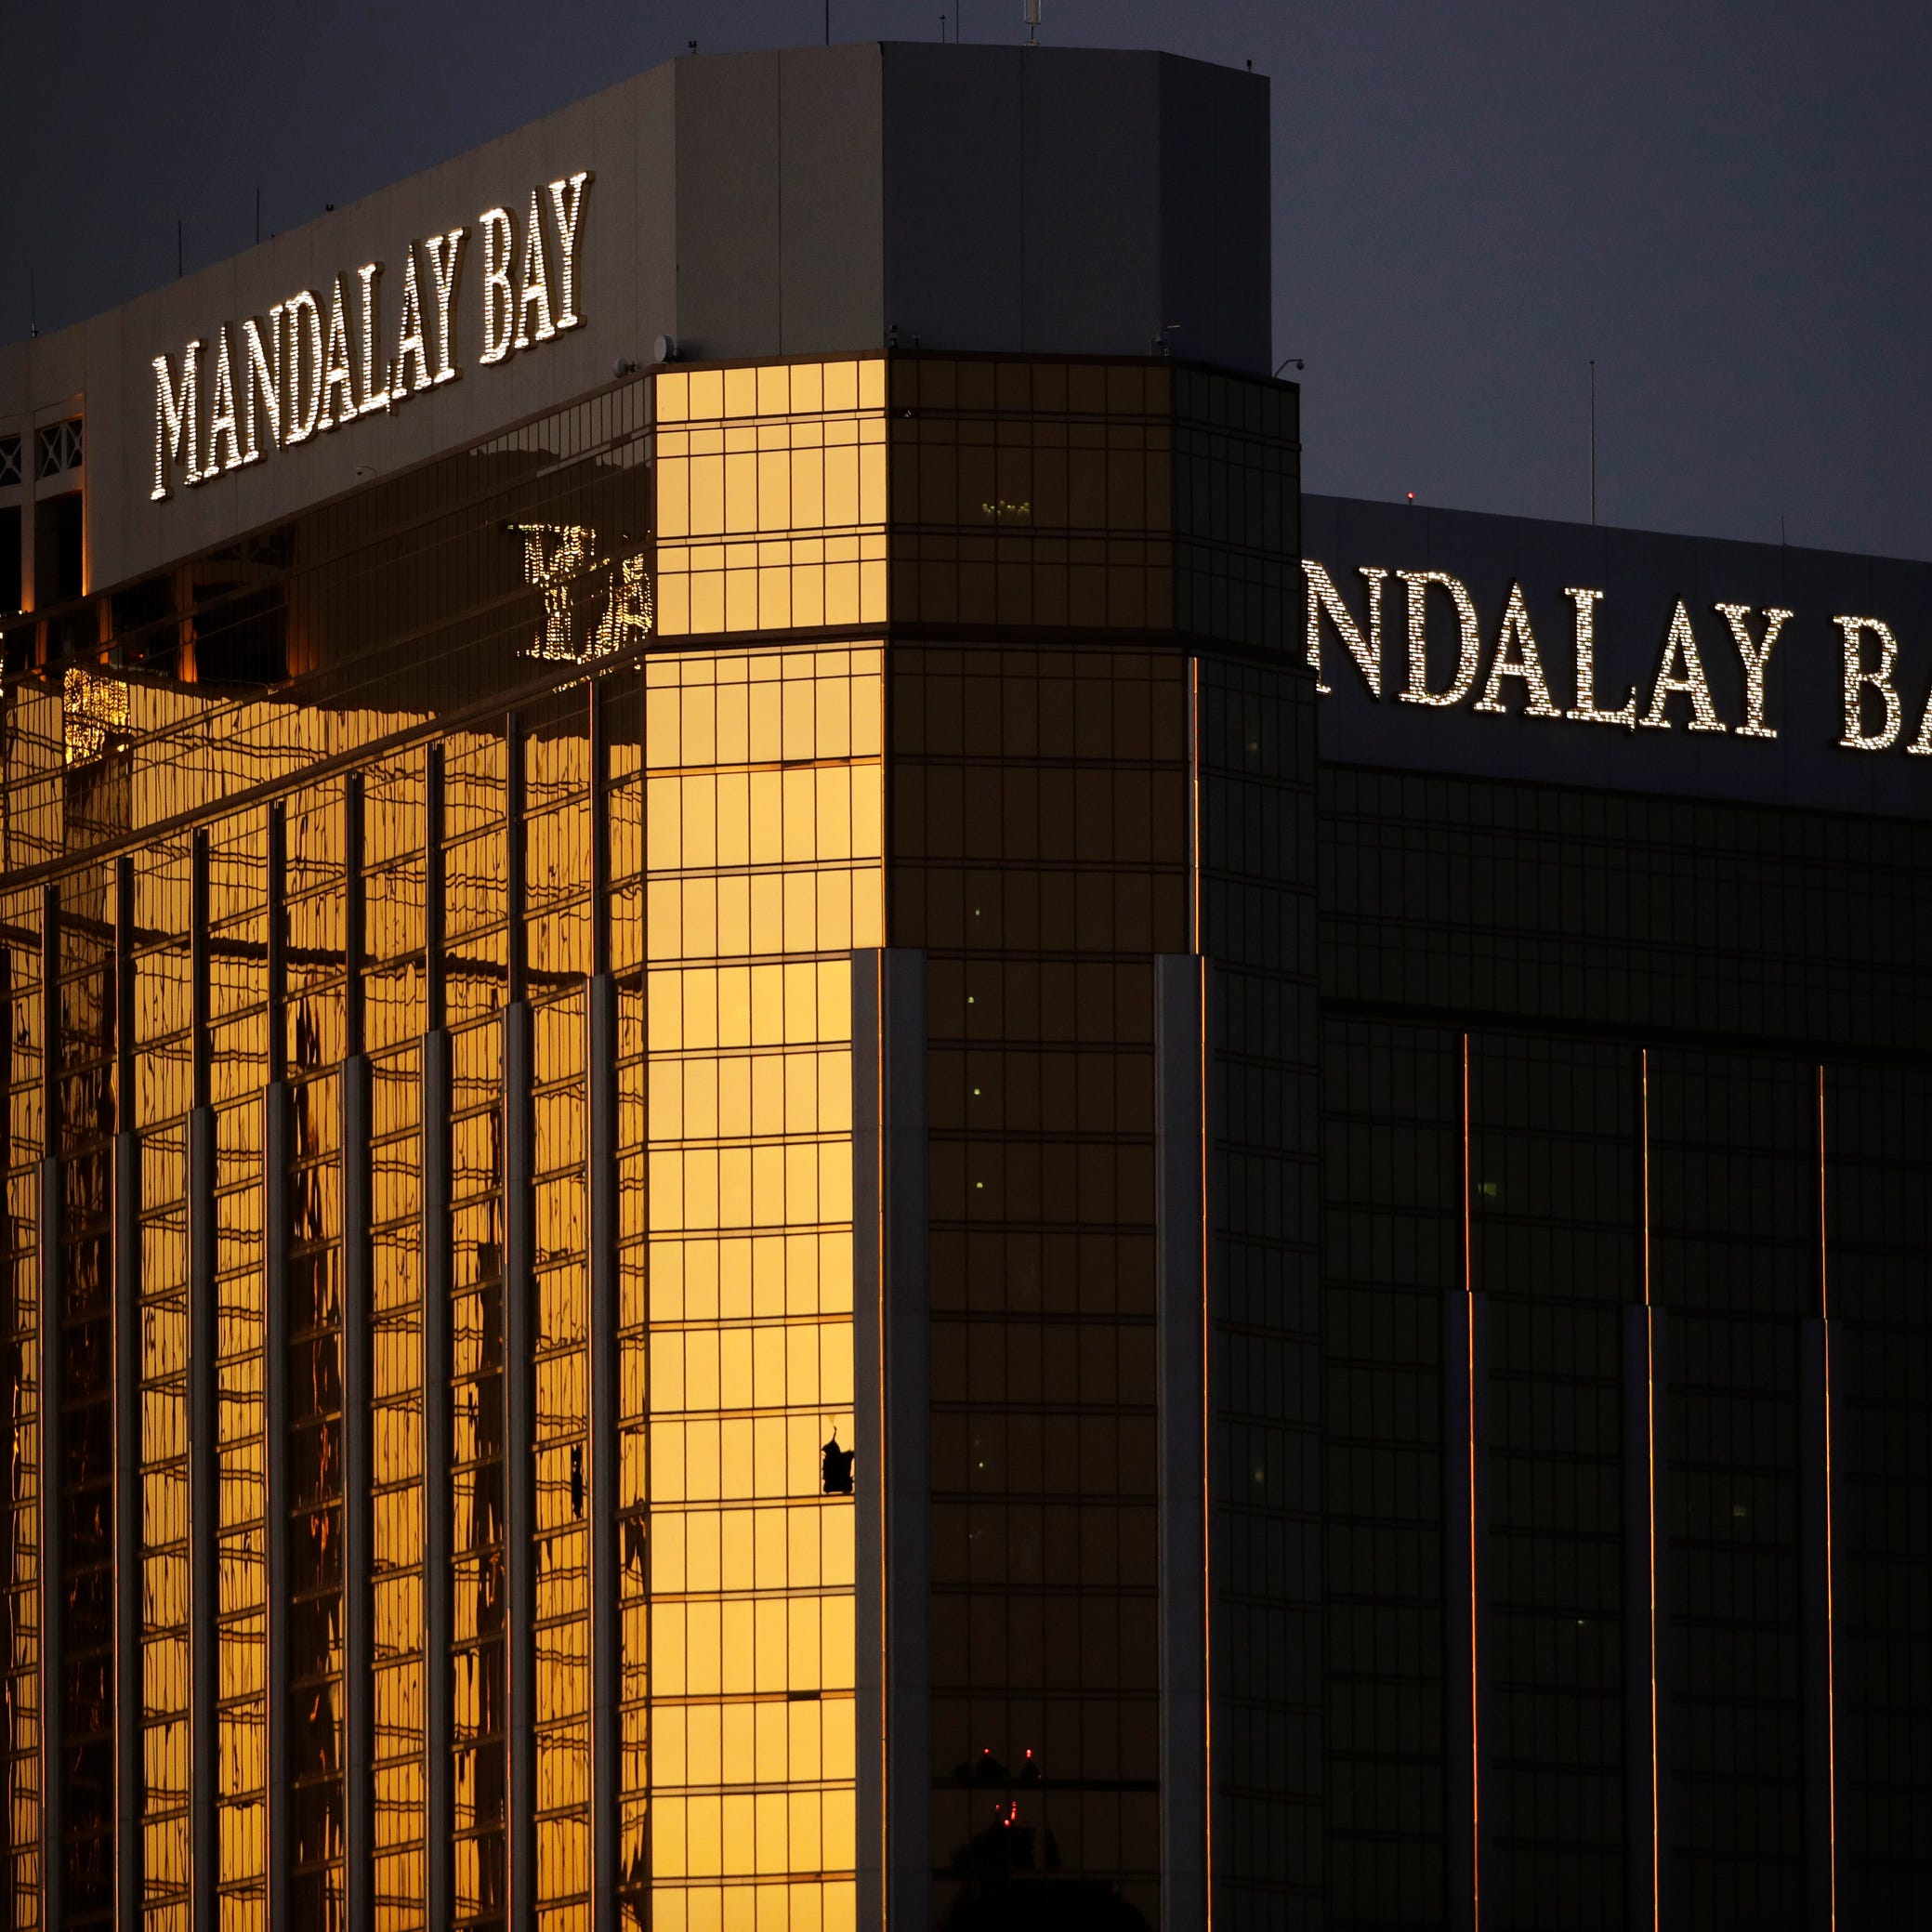 This photo, taken two days after the Oct. 1, 2017, mass shooting in Las Vegas, shows broken windows where a gunman perched to fire upon nearly 20,000 revelers who had gathered at an outdoor country music concert across the street from the Mandalay Bay hotel; 58 were killed and more than 800 were wounded.